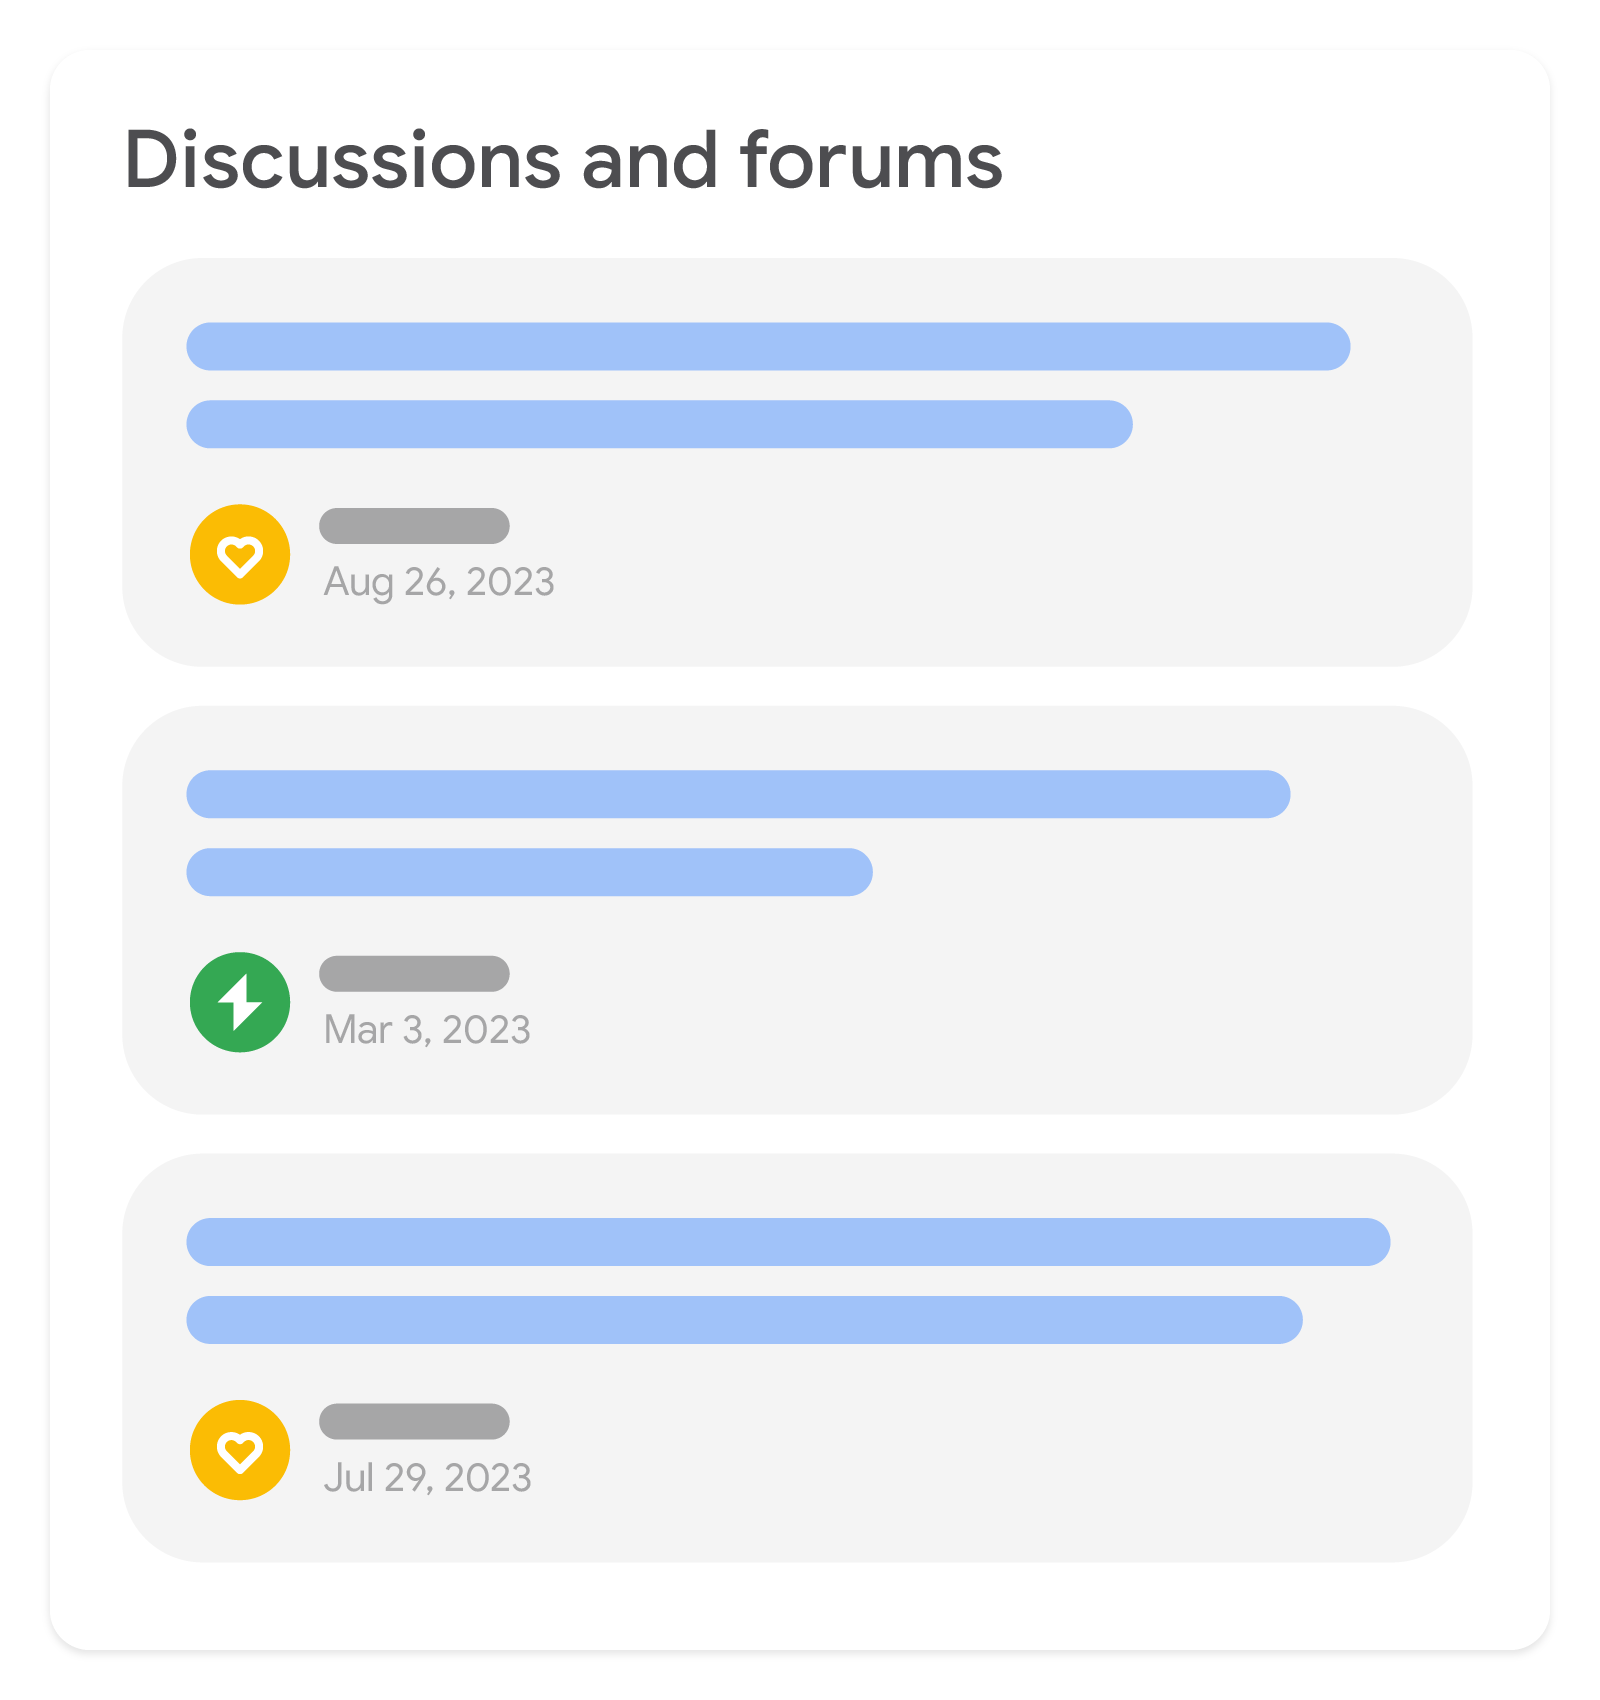 An illustration of the discussions and forums rich result